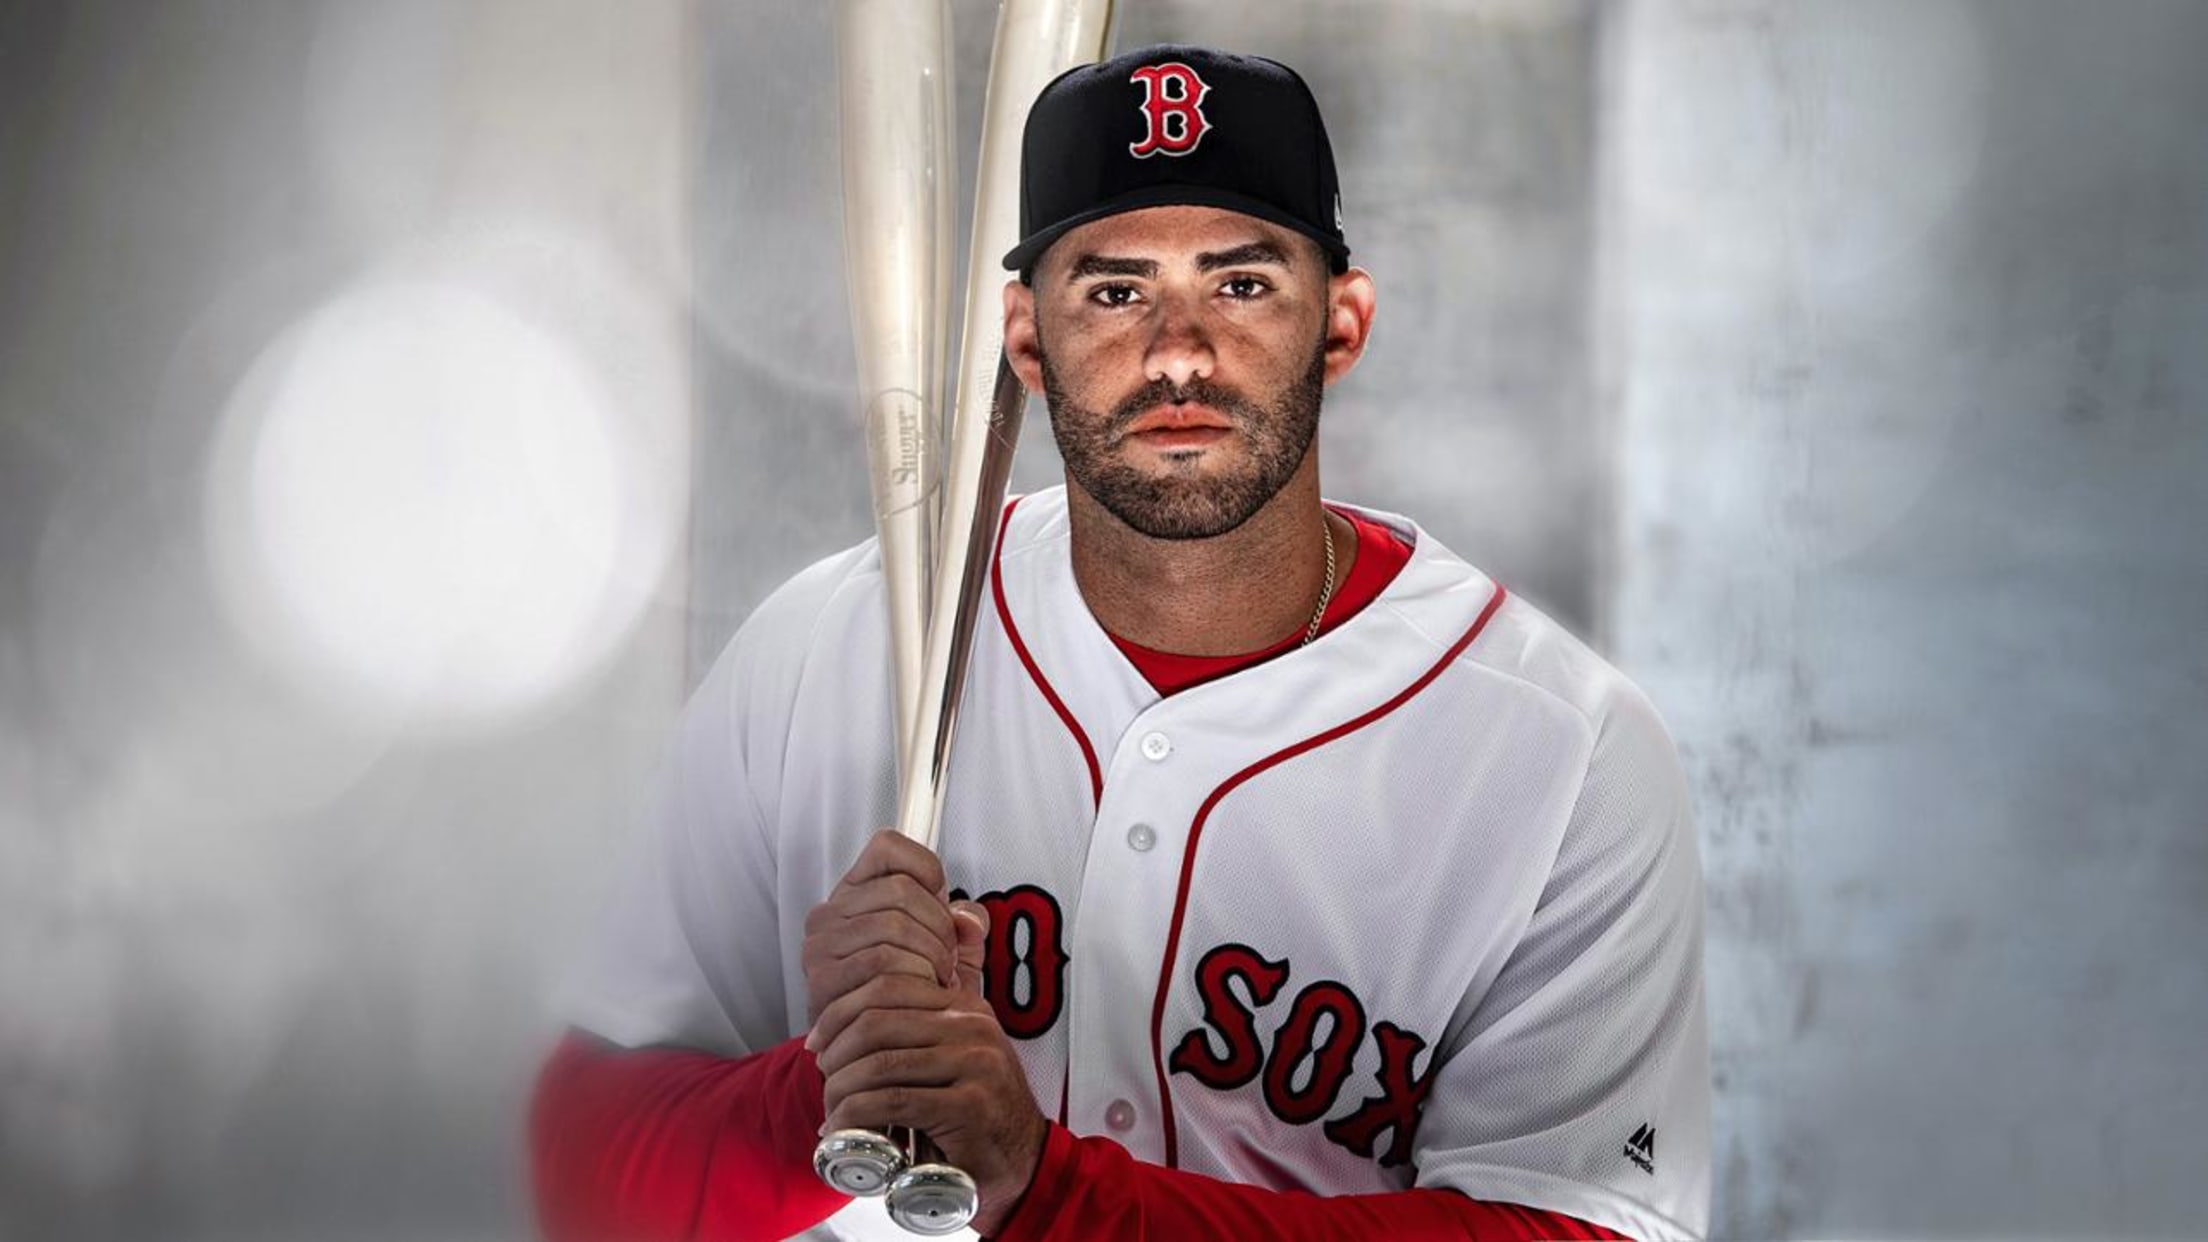 J.D. Martinez of the Boston Red Sox poses for a portrait during a